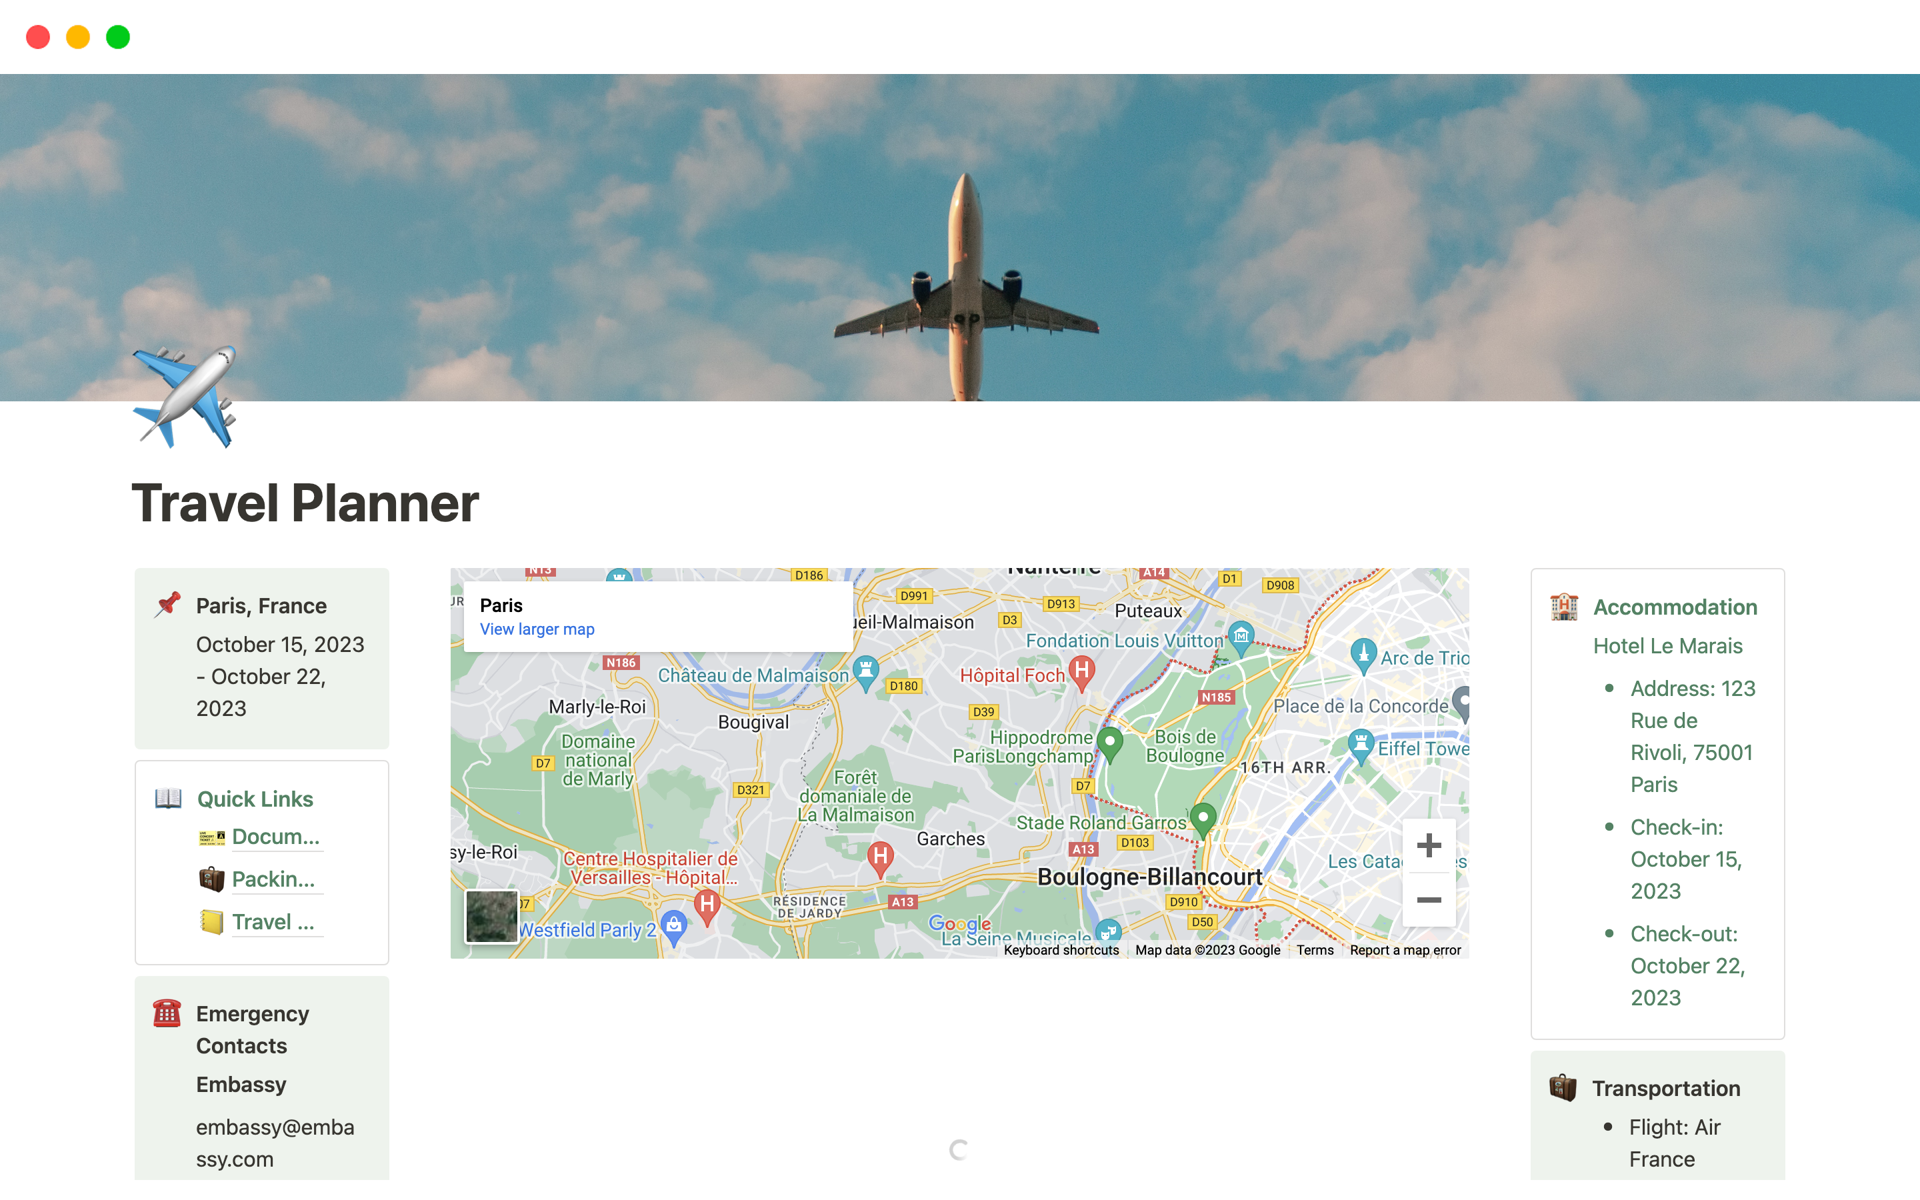 Plan your dream trip with this comprehensive travel planner template designed for use in Notion. 